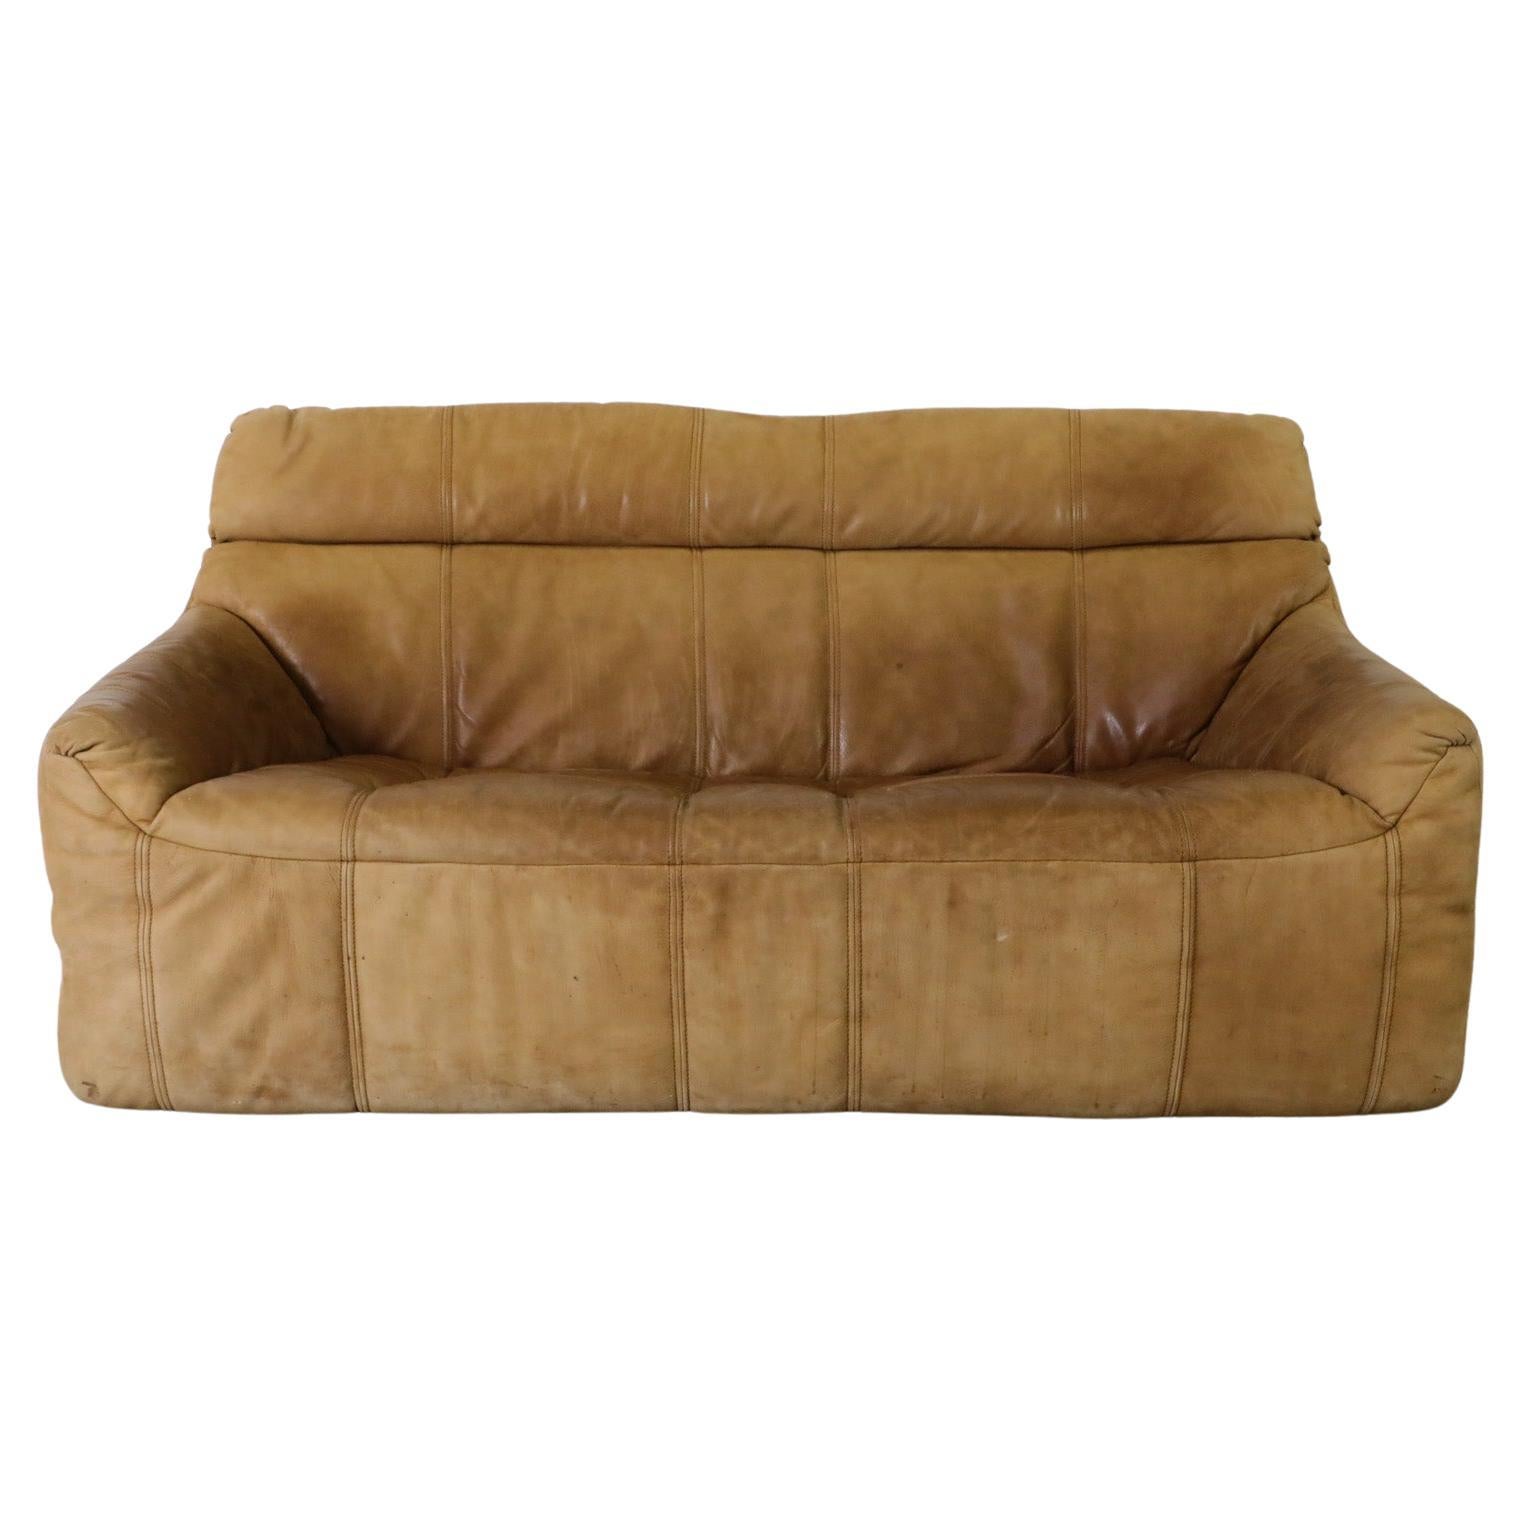 Rolf Benz Soft Form Buck Leather Loveseats, 1970s For Sale